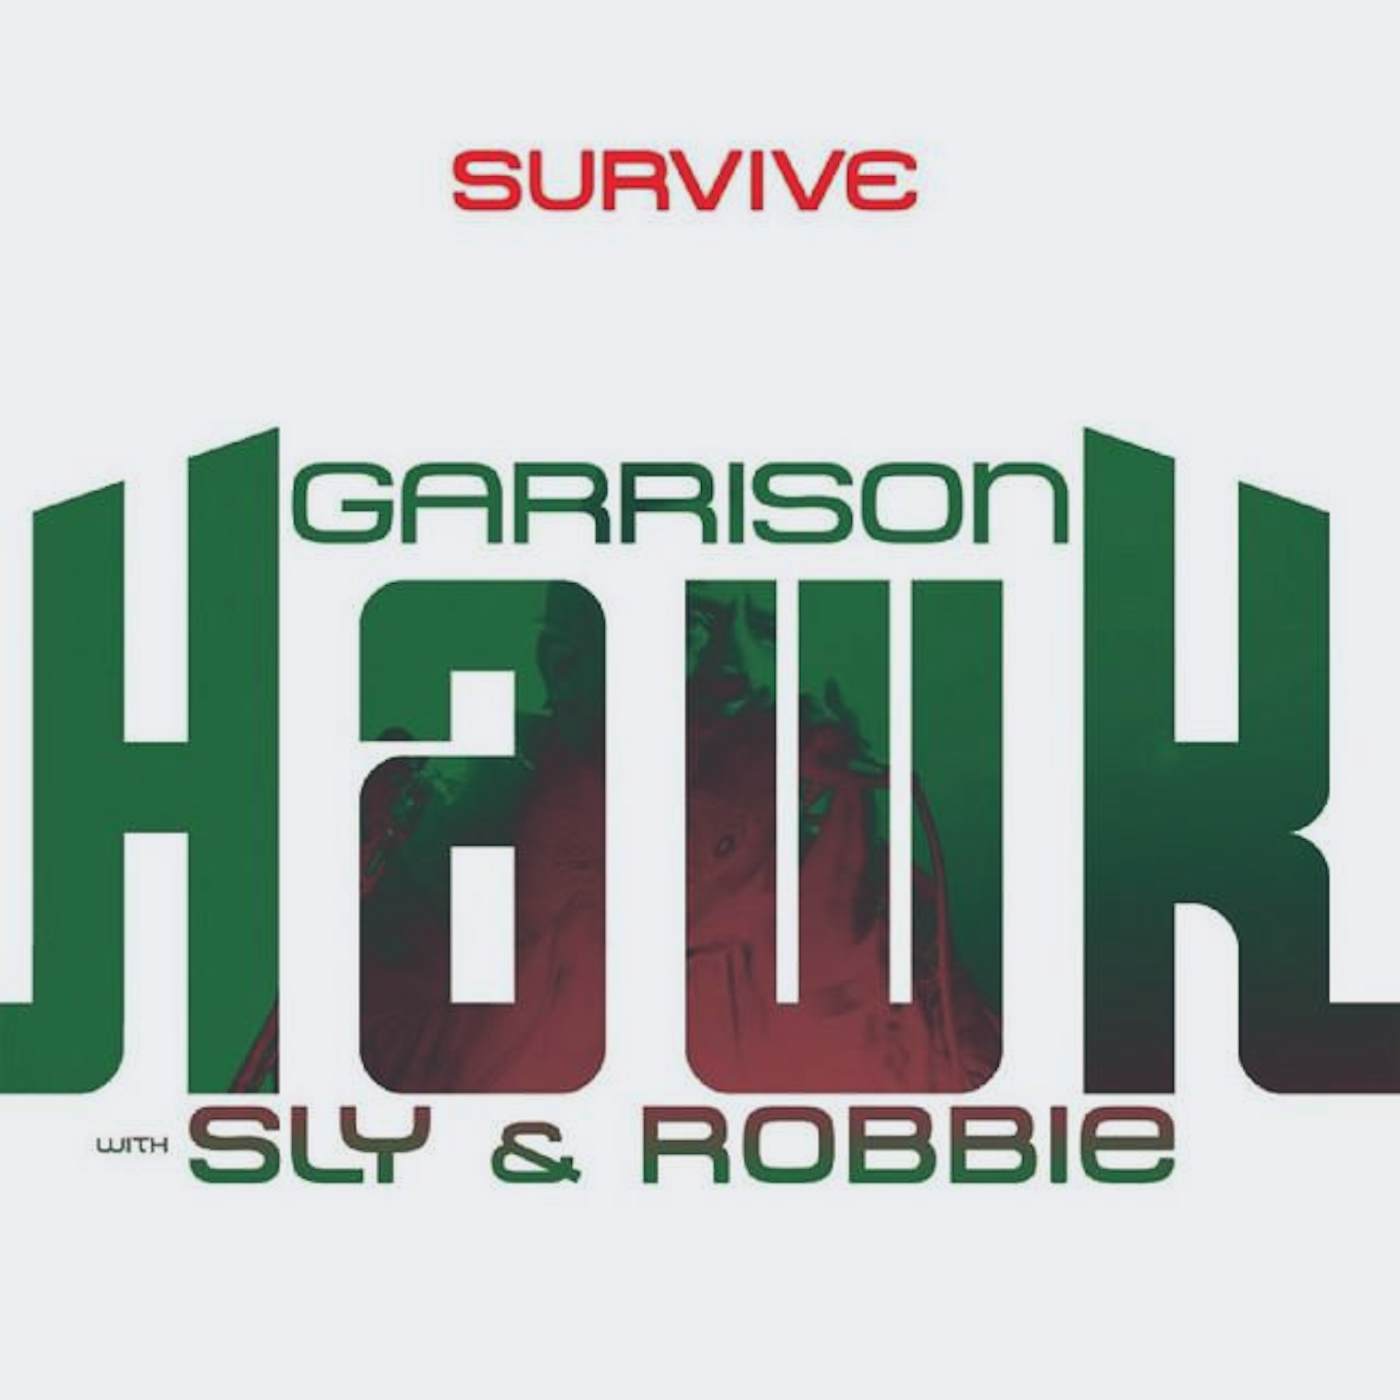 Garrison Hawk (with Sly and Robbie)